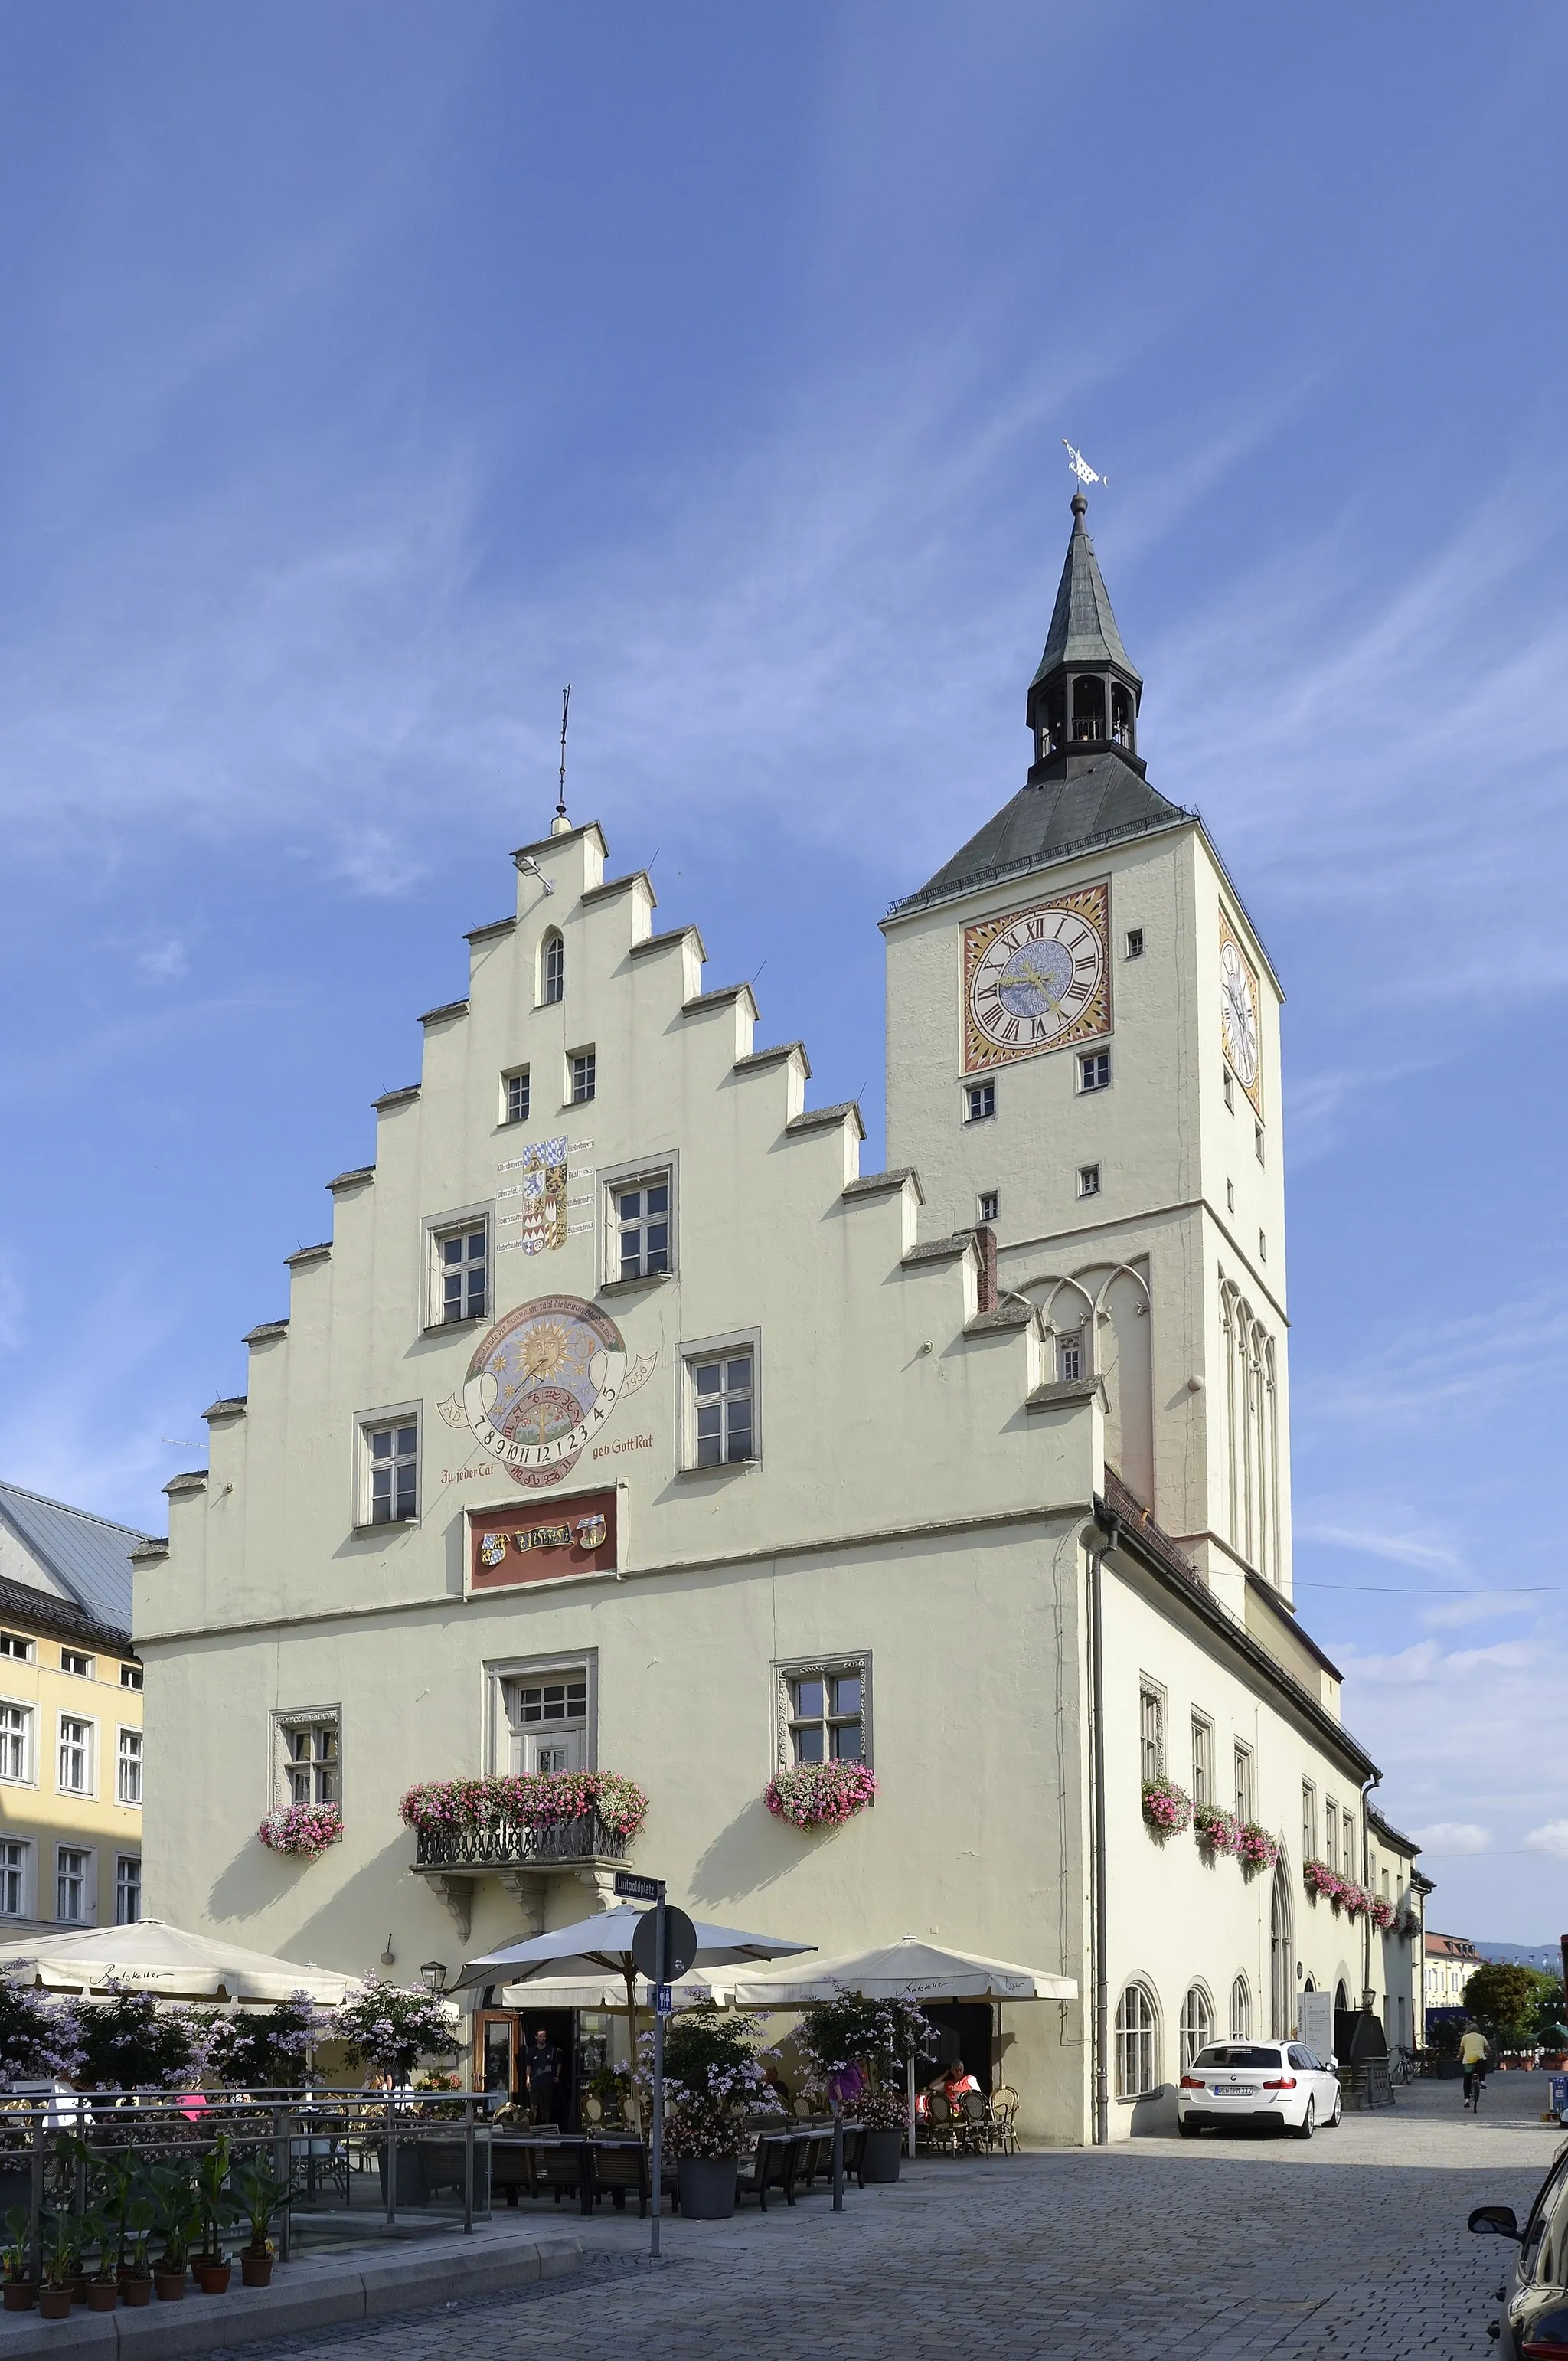 Photo showing: The Altes Rathaus (Engl.: "old town hall") of Deggendorf, Bavaria.